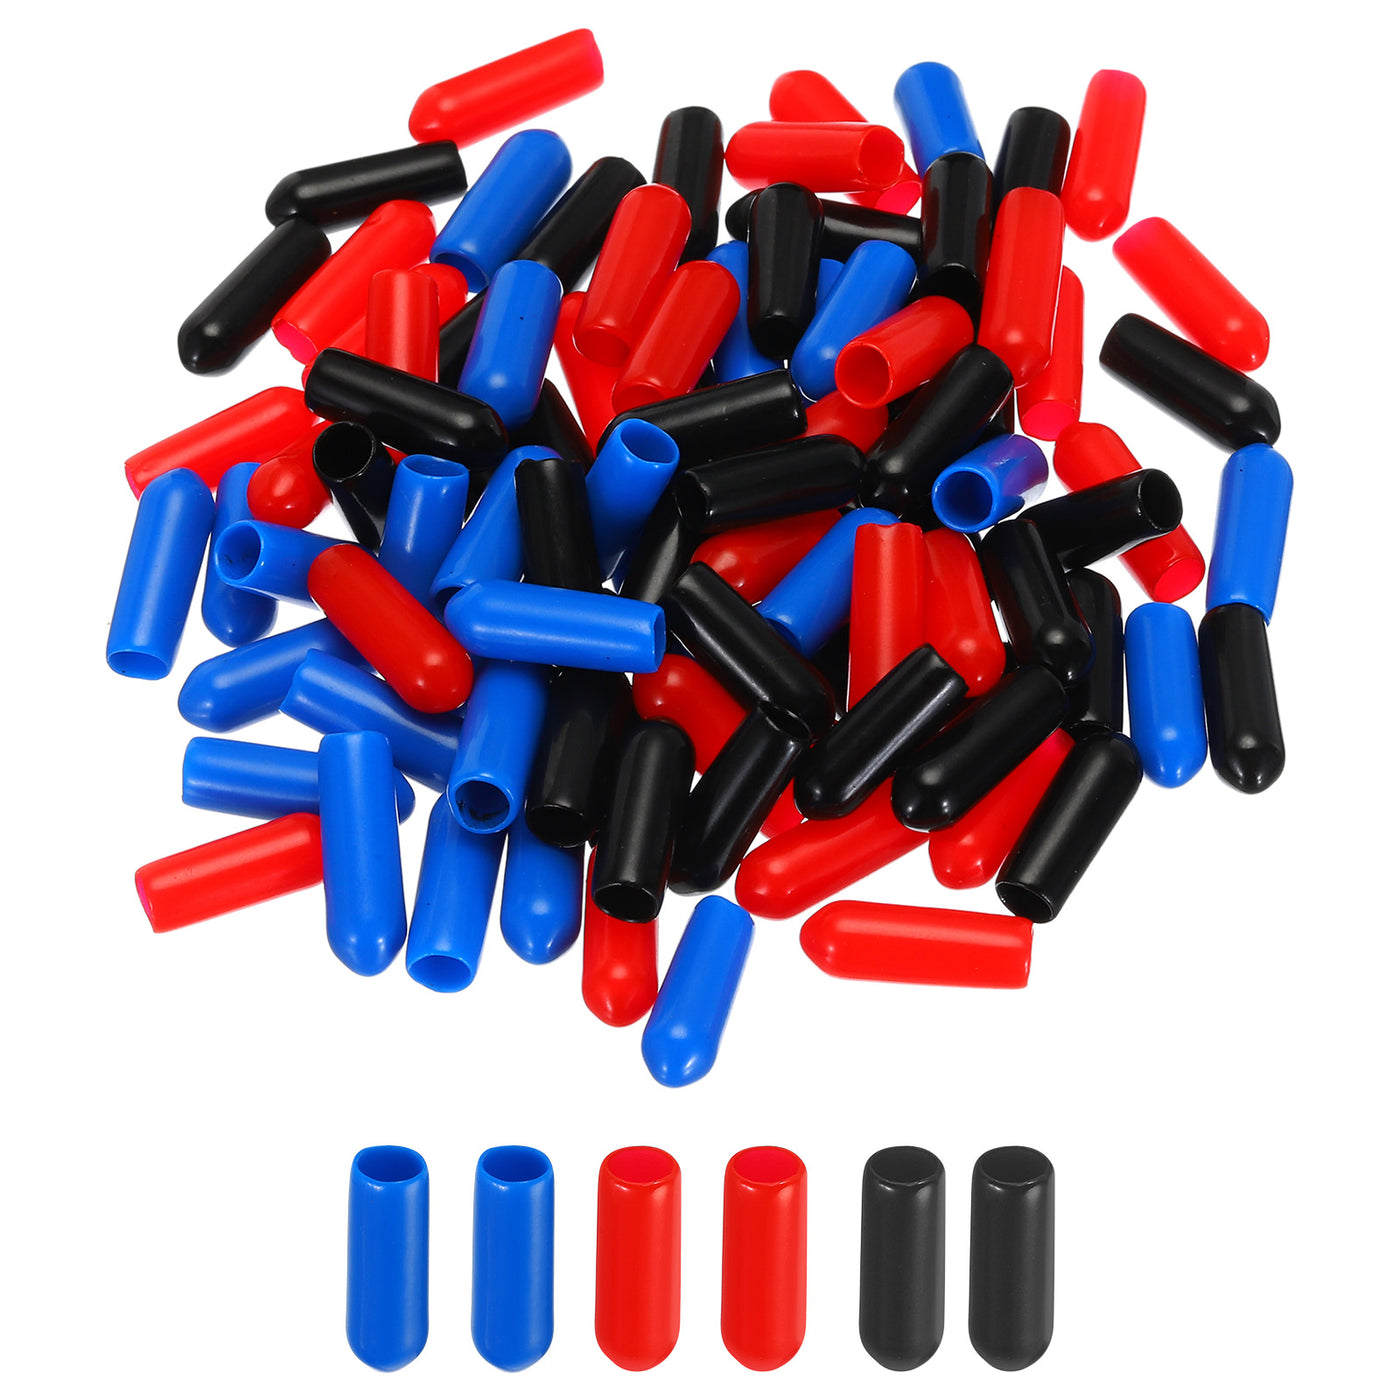 uxcell Uxcell 90pcs Rubber End Caps 5.5mm ID Vinyl PVC Round Tube Bolt Cap Cover Screw Thread Protectors, Black Red Blue